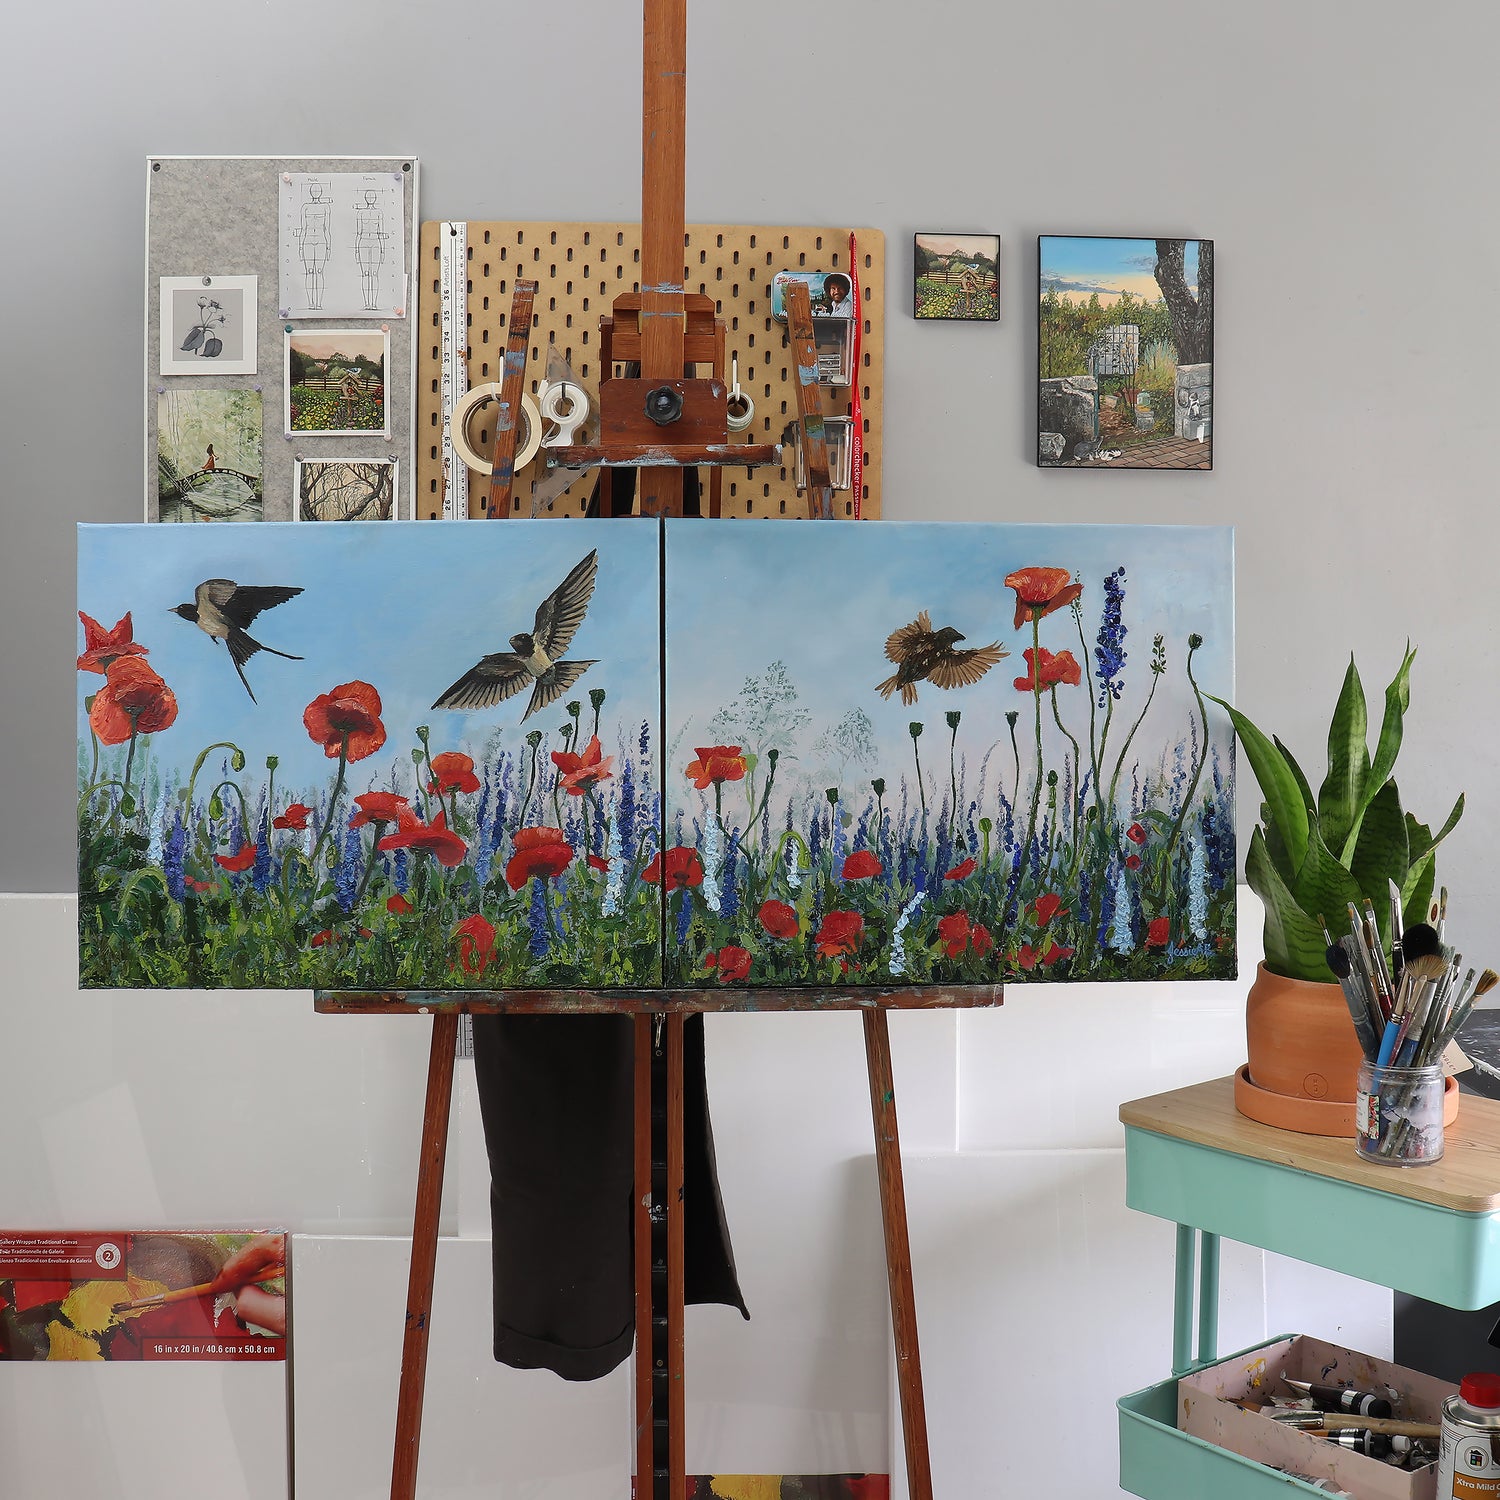 Original painting by Jessie Bettersworth of swallows flying through fields of poppy wildflowers